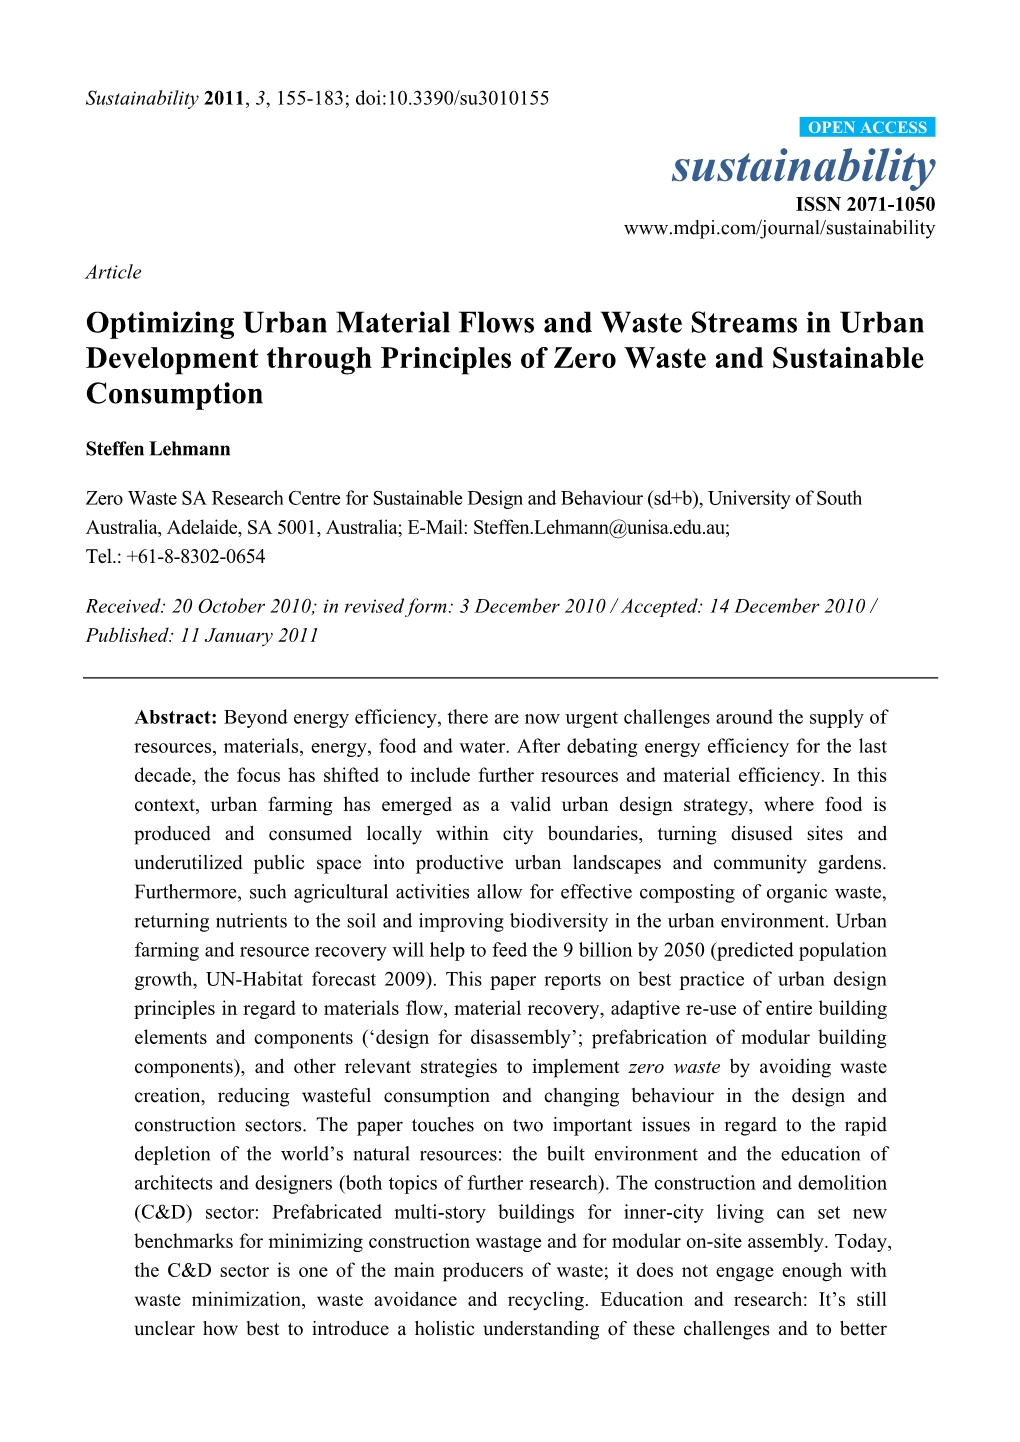 Optimizing Urban Material Flows and Waste Streams in Urban Development Through Principles of Zero Waste and Sustainable Consumption